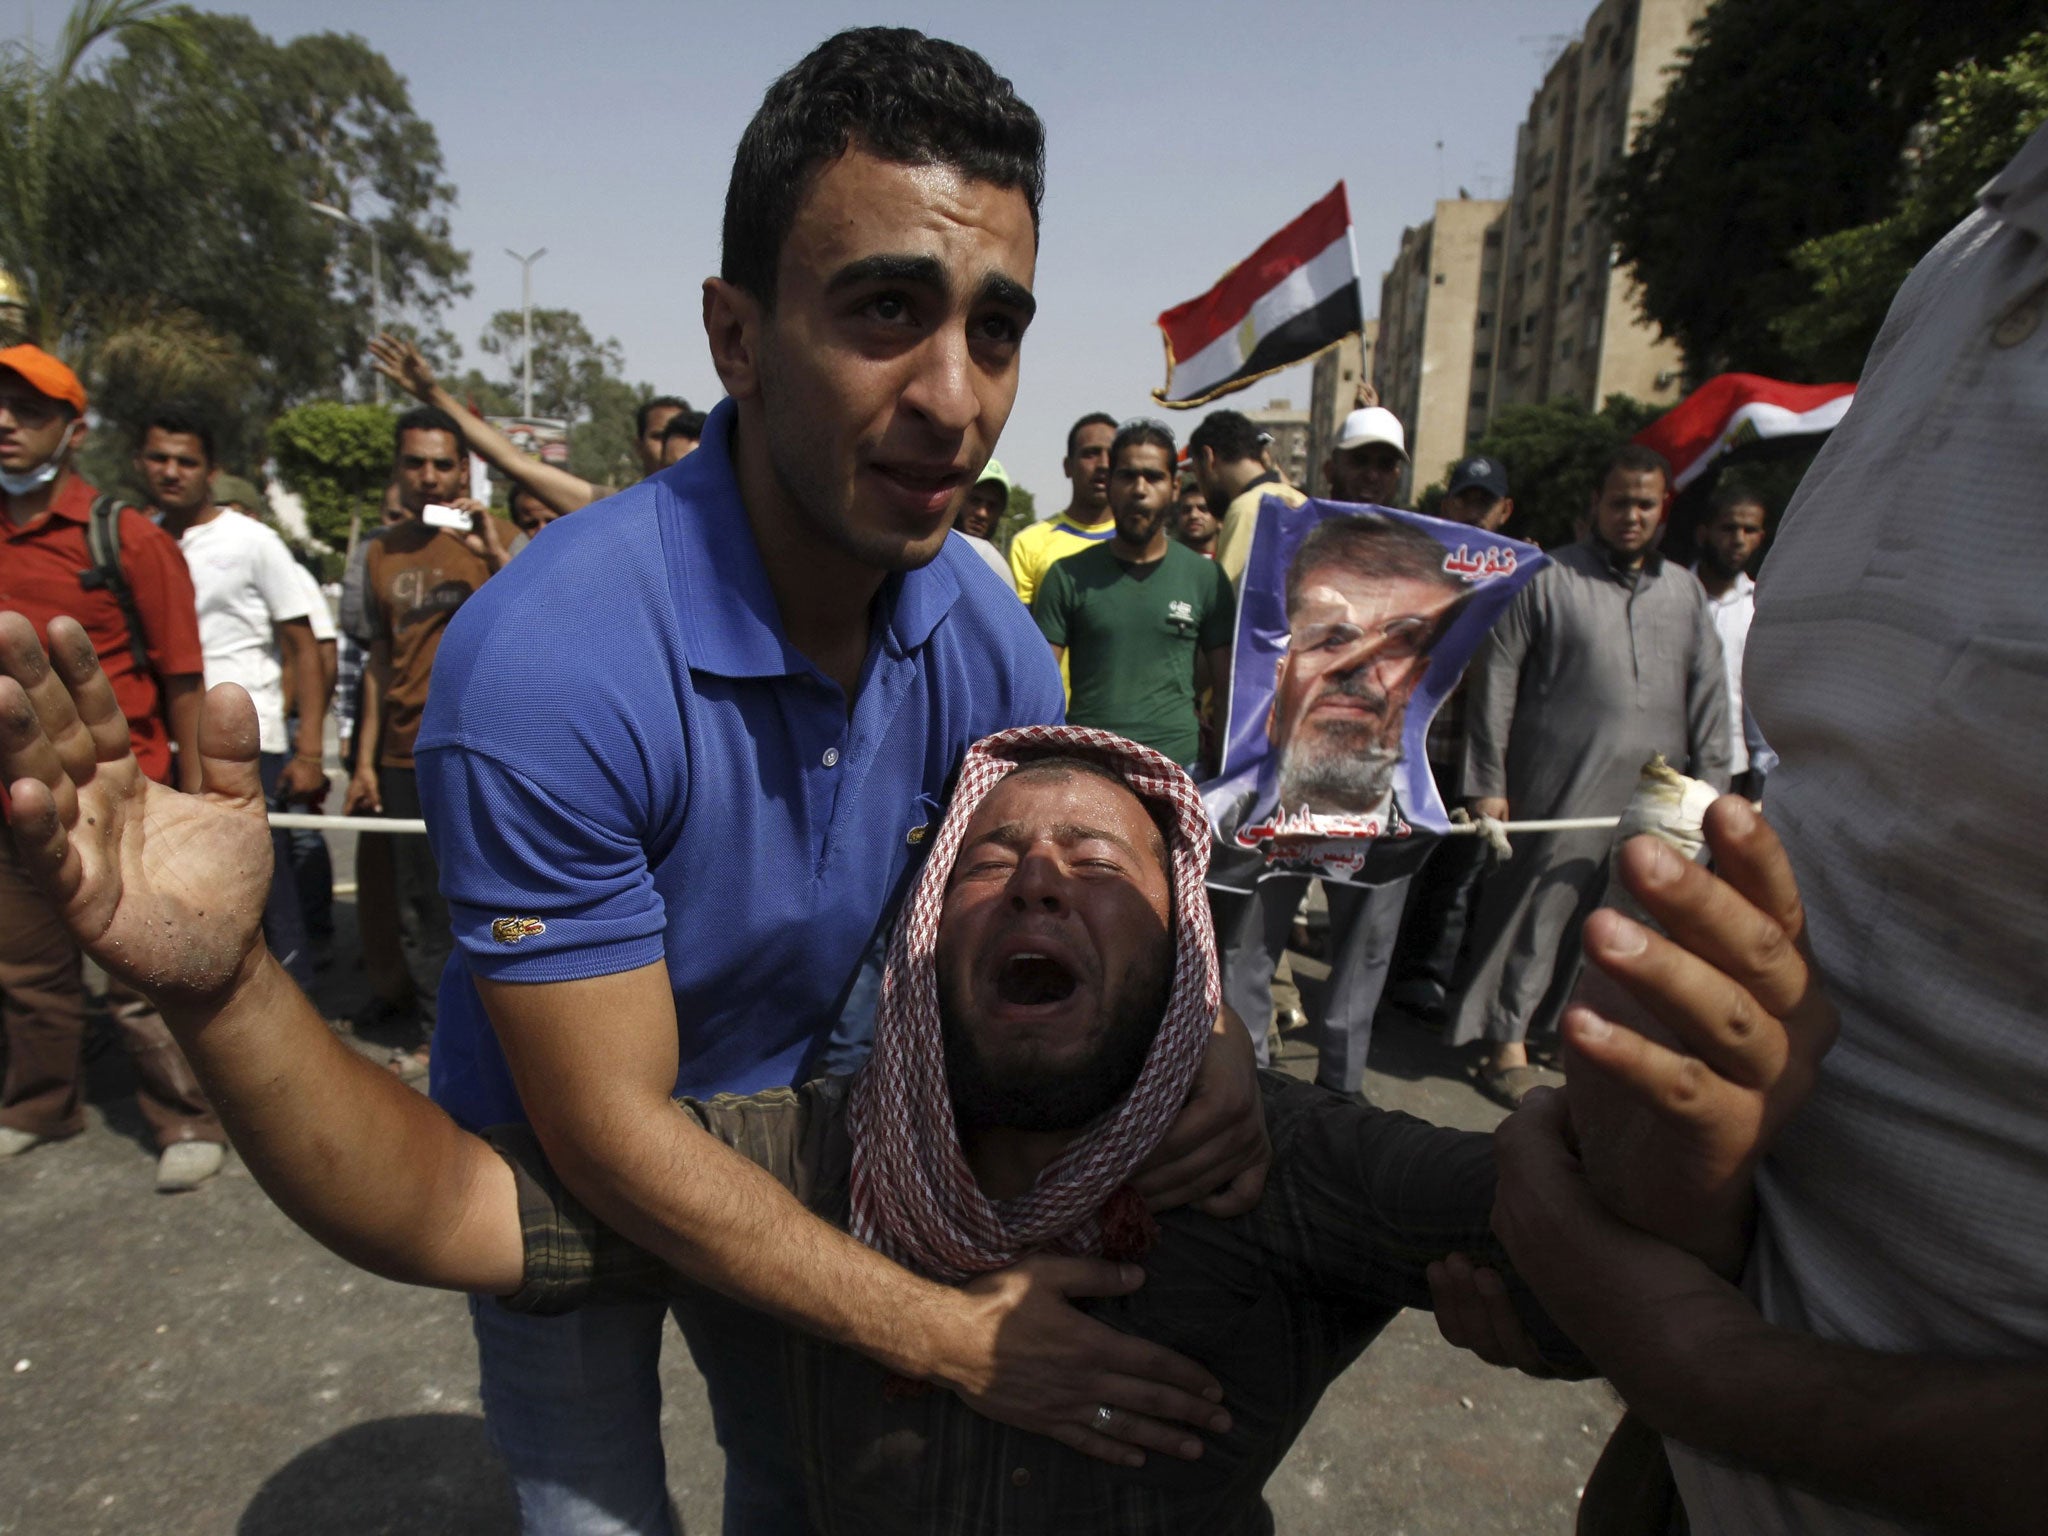 Members of the Muslim Brotherhood and supporters of Mohamed Morsi outside the Republican Guard headquarters in Cairo